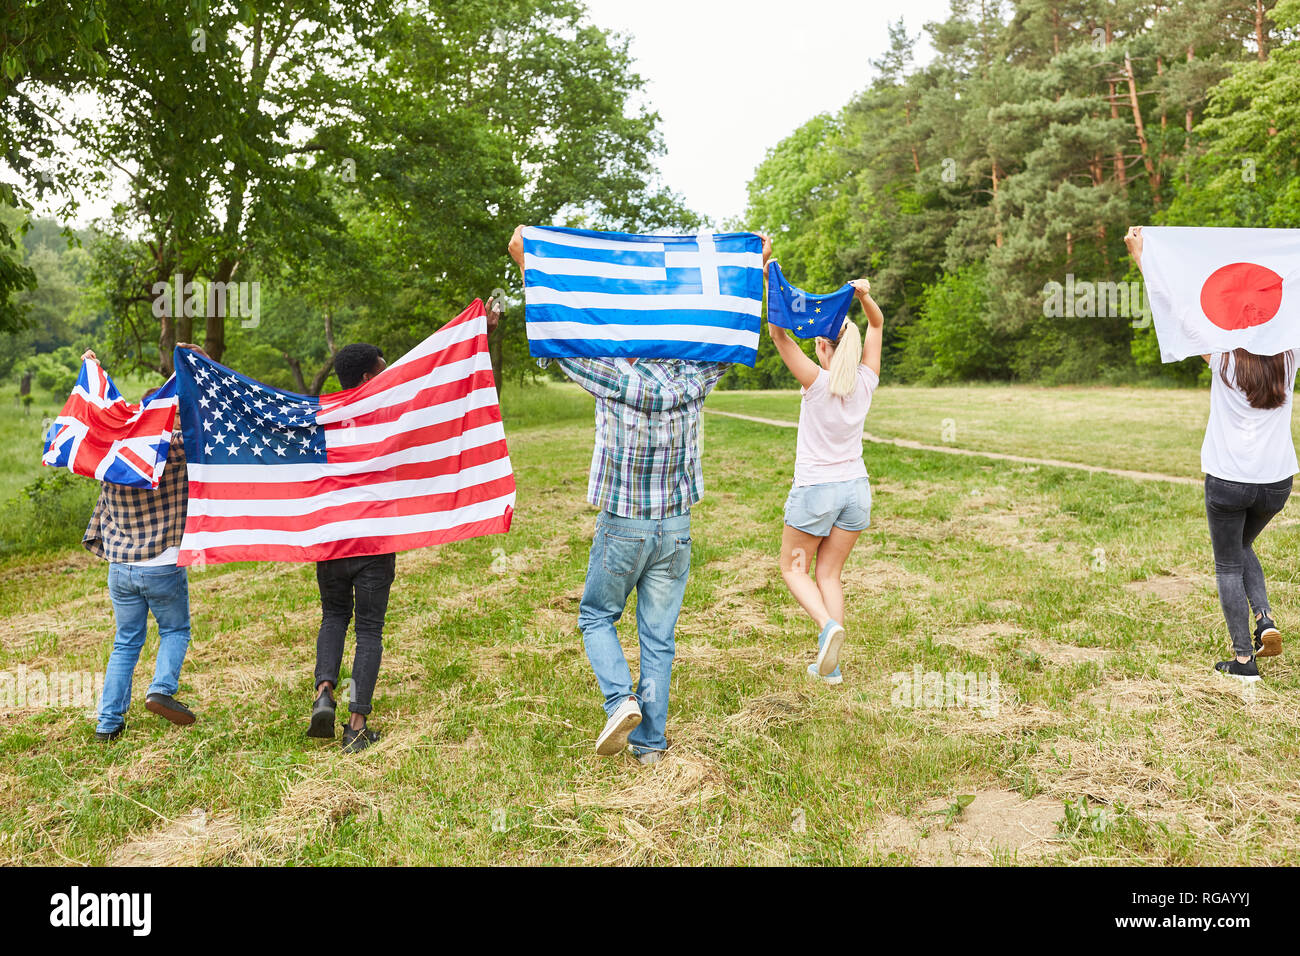 Students run with different national flags as a sign of multilateralism Stock Photo